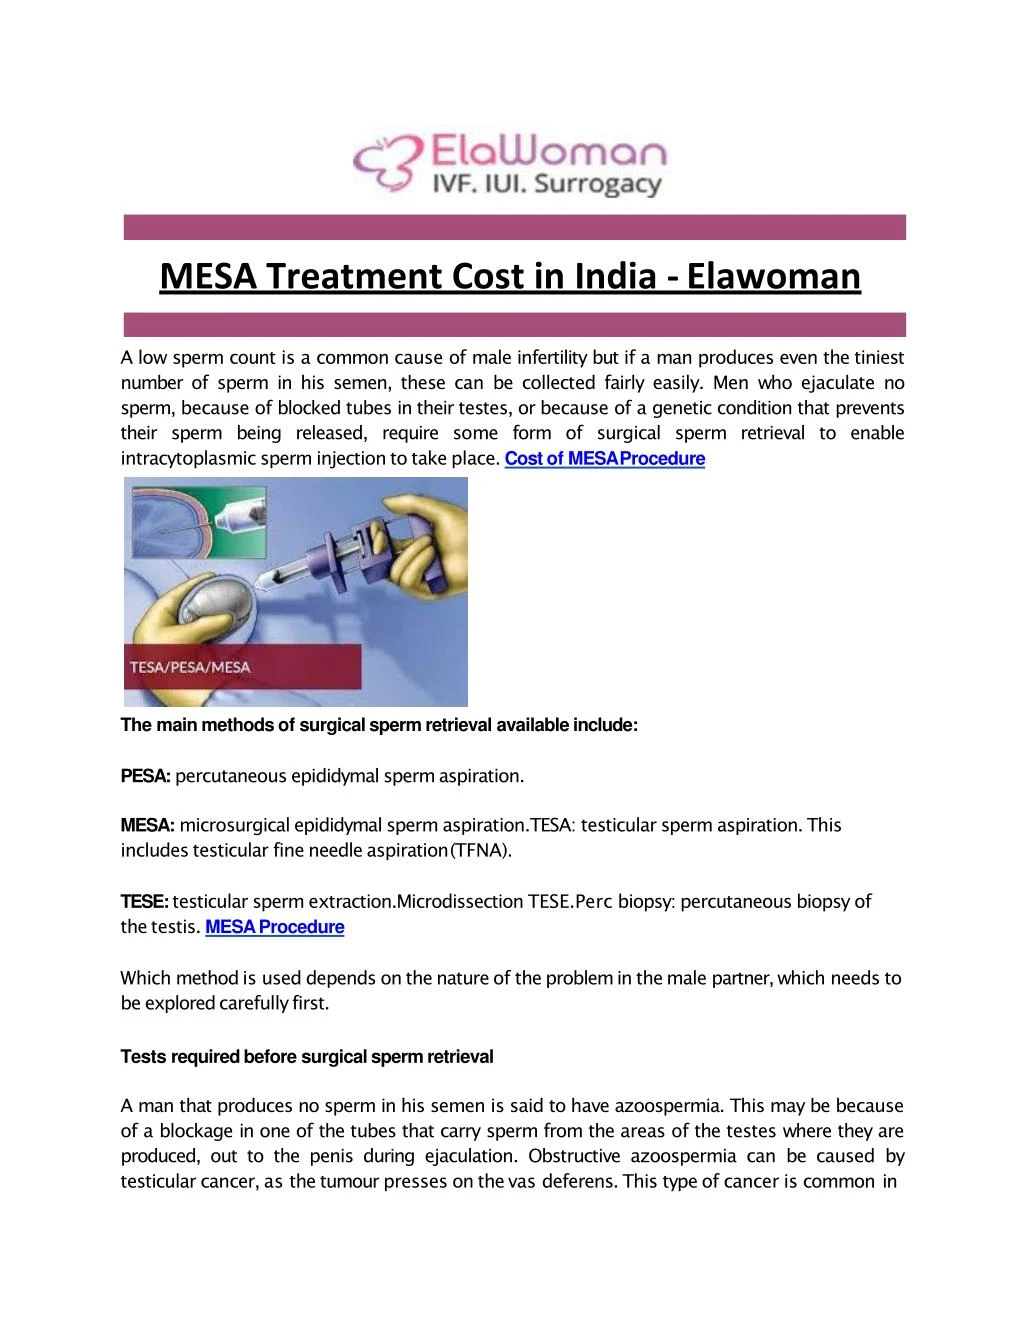 mesa treatment cost in india elawoman